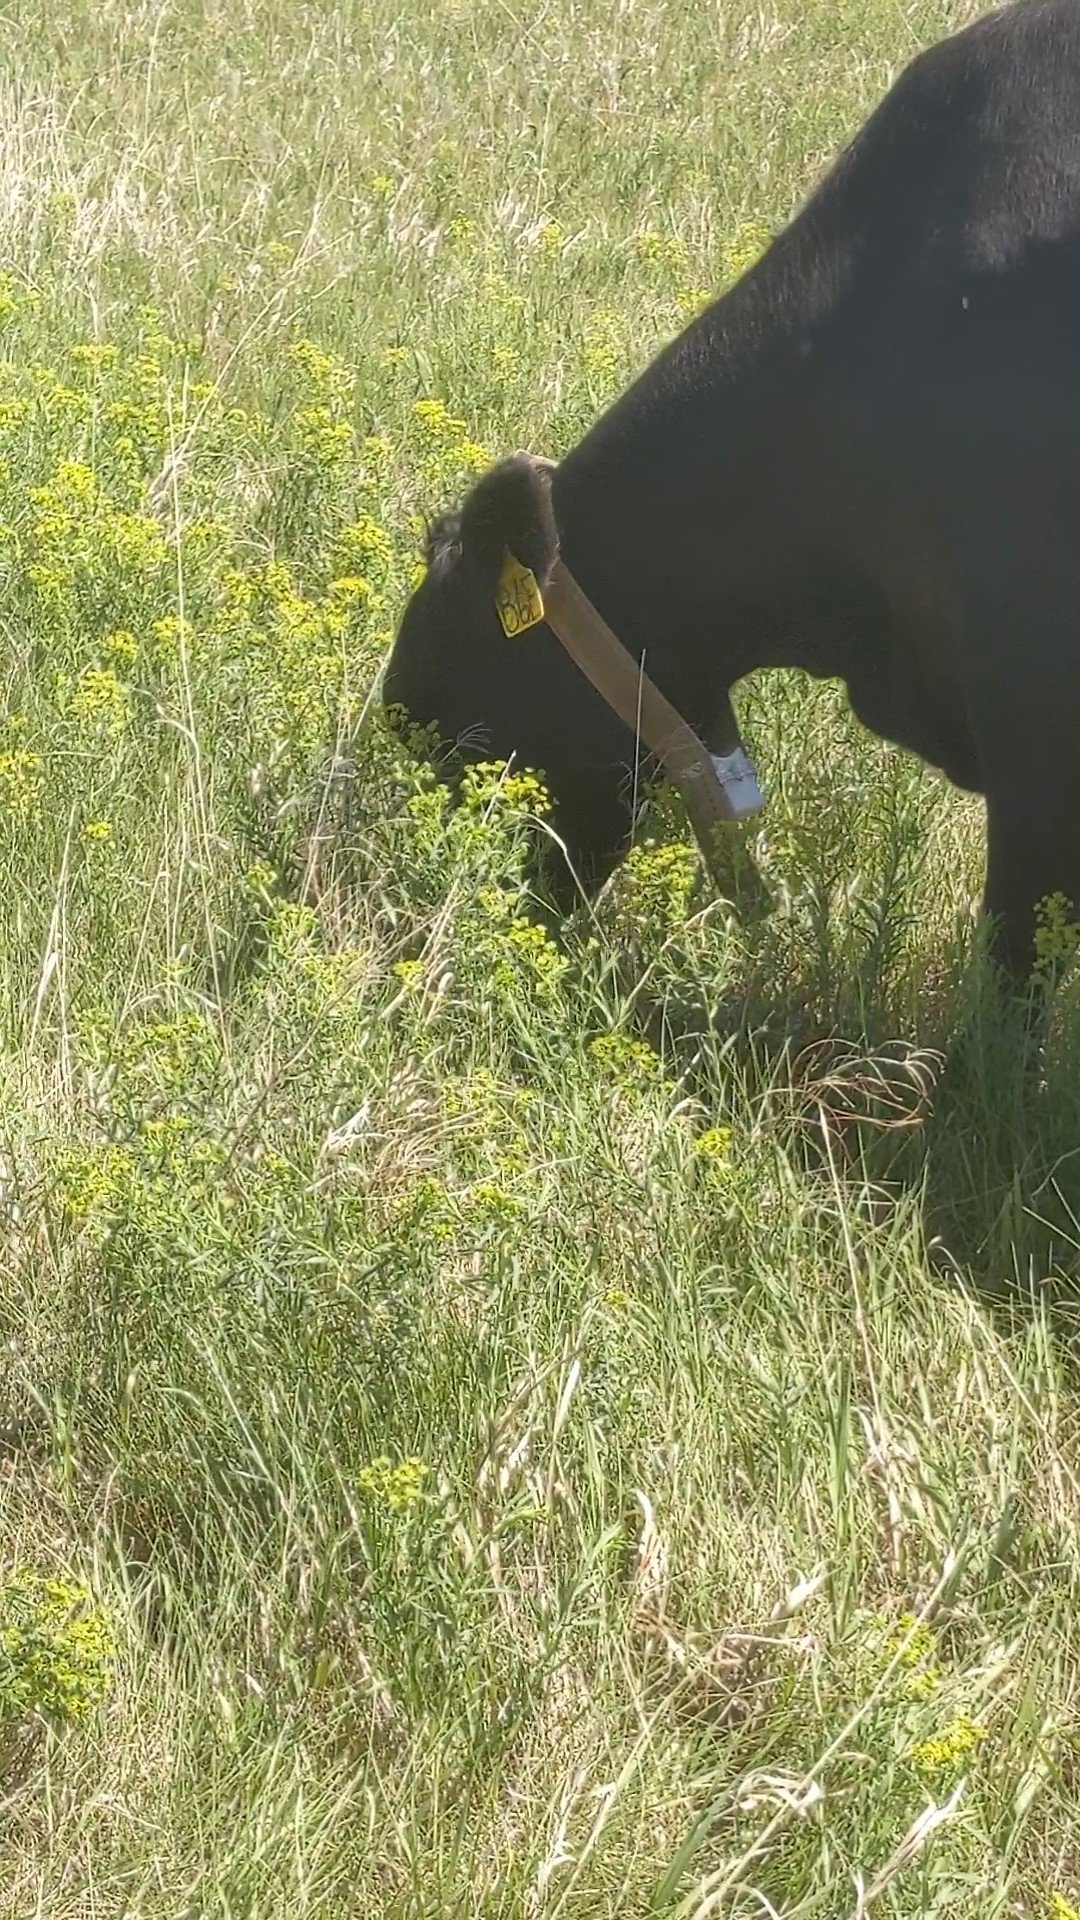 Cow grazing in a leafy spurge patch